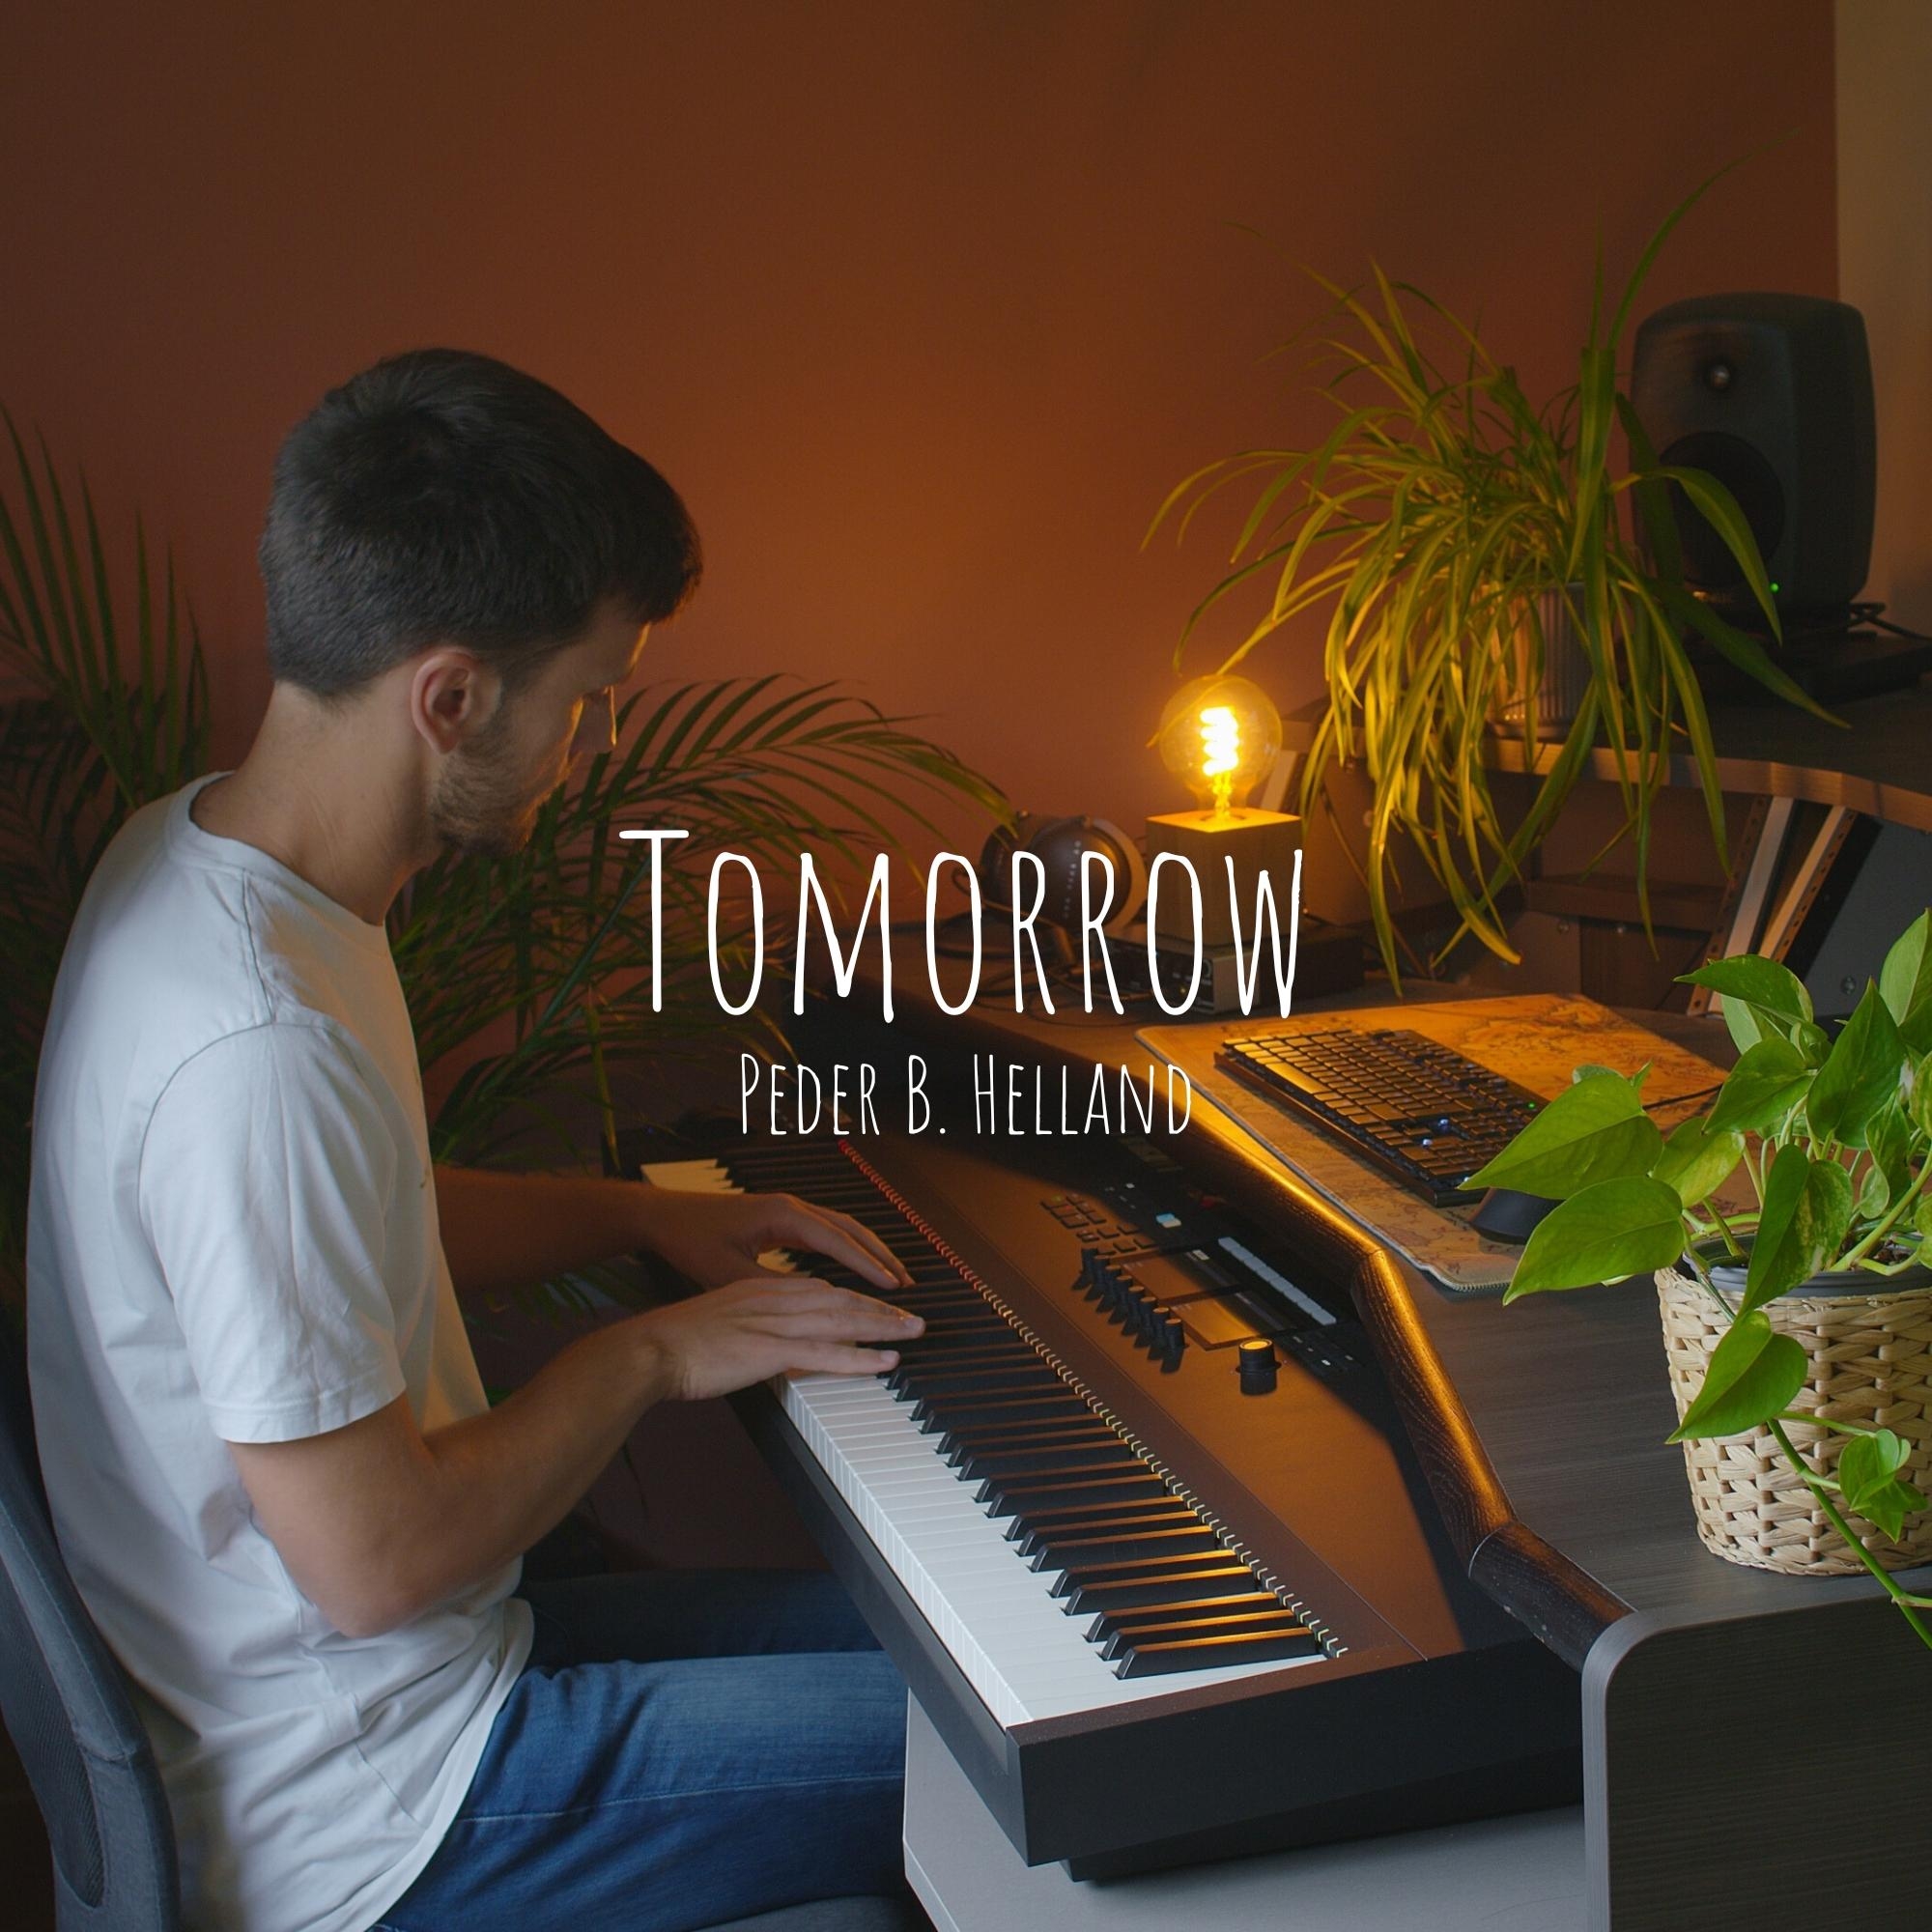 Cover art for the single Tomorrow by Peder B. Helland